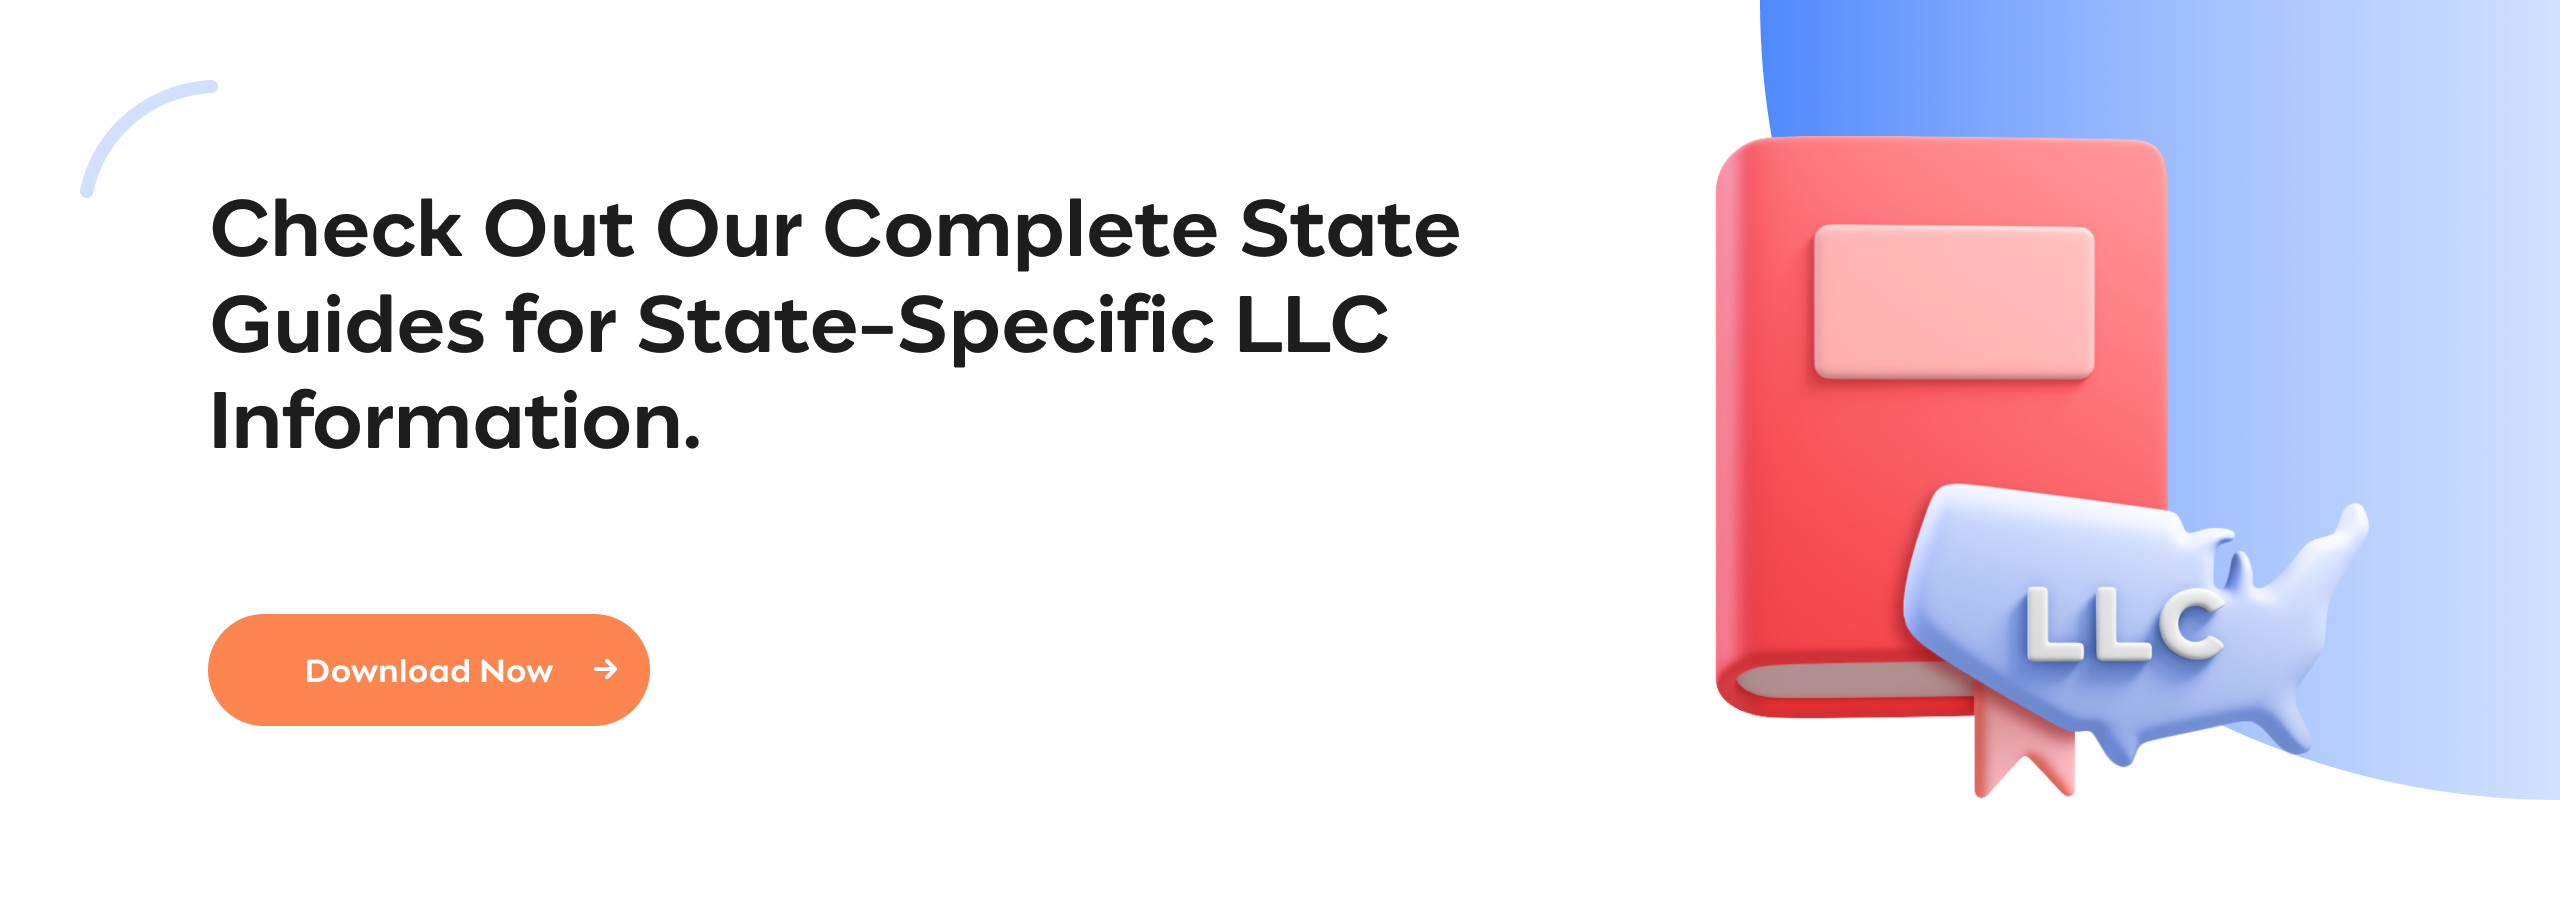 Check Out Our Complete State Guides for State-Specific LLC Information.